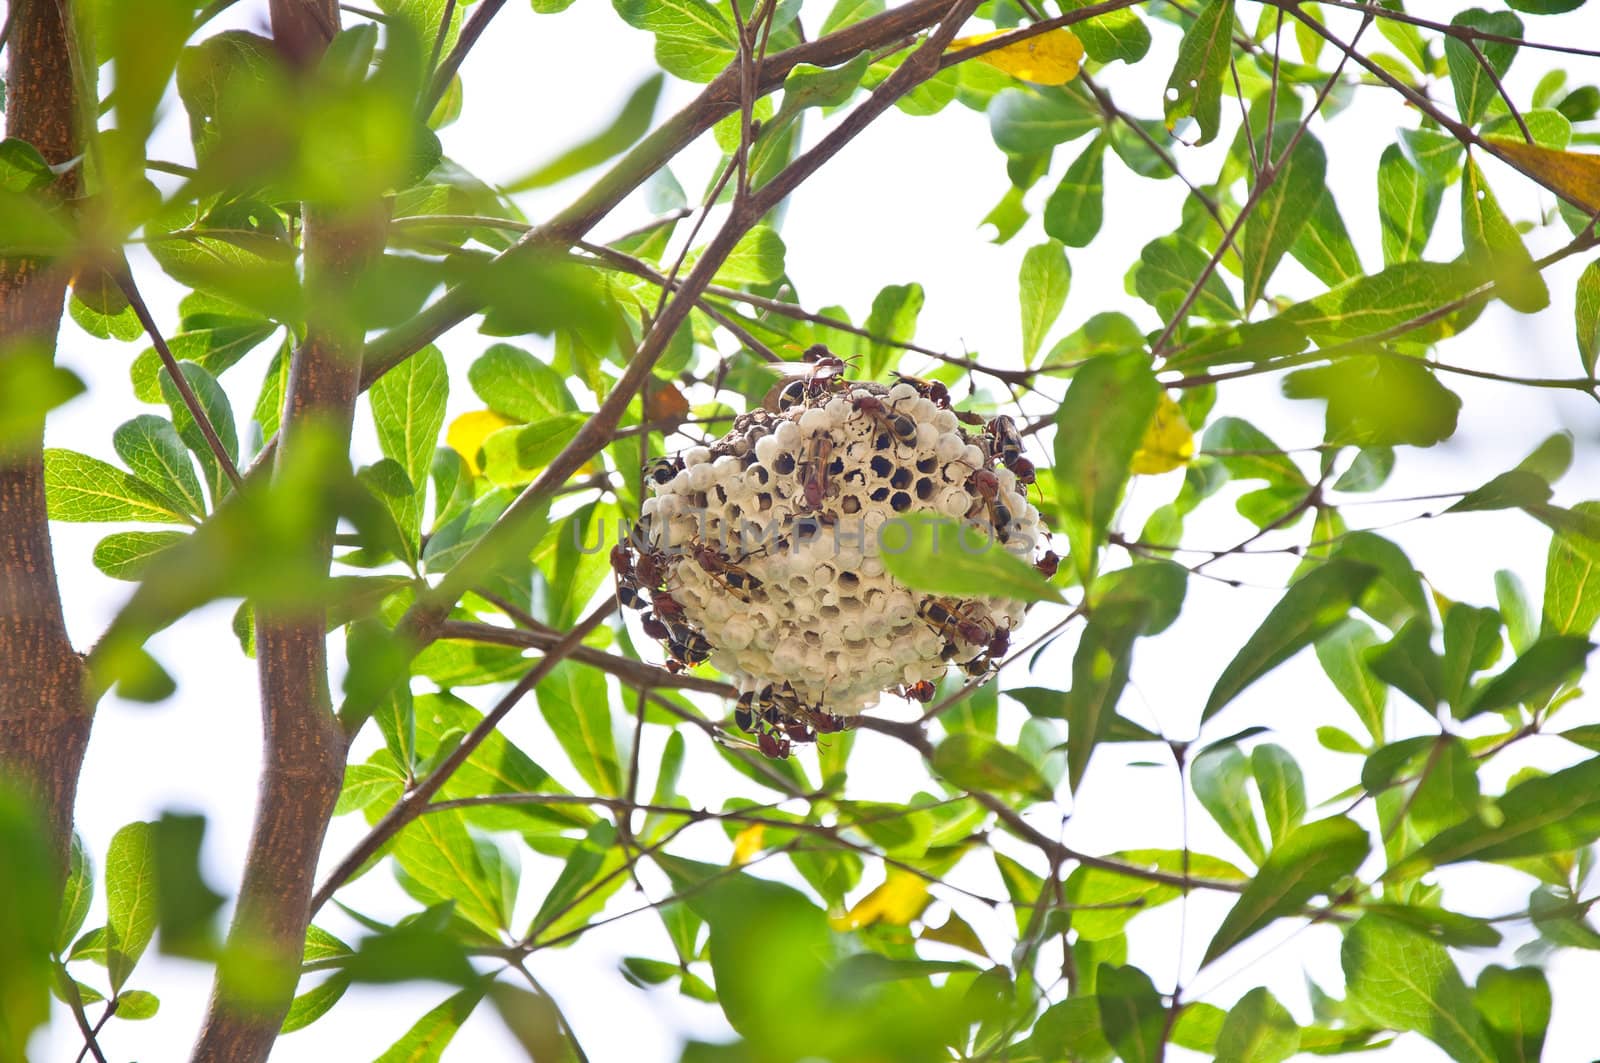 Wasp hive clinging to a tree, Thailand